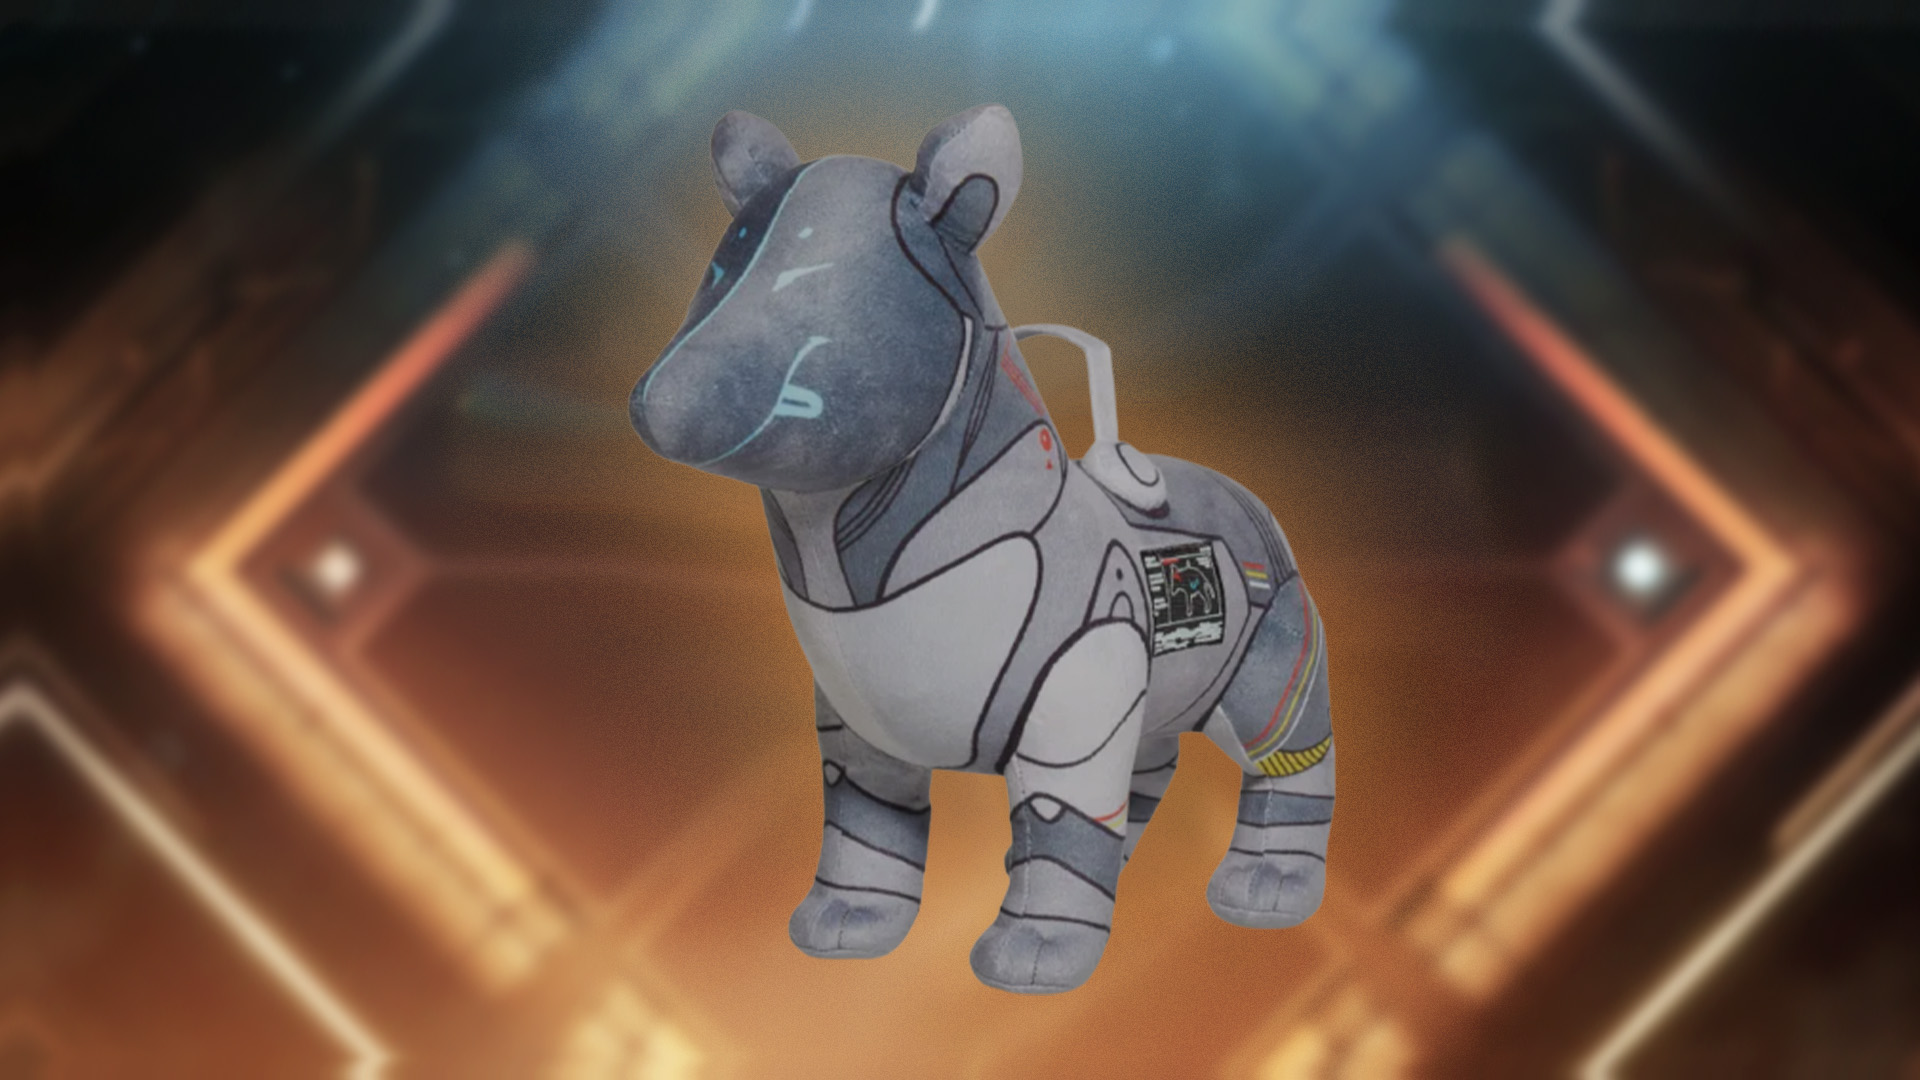 Destiny 2 dog plush can soon be yours